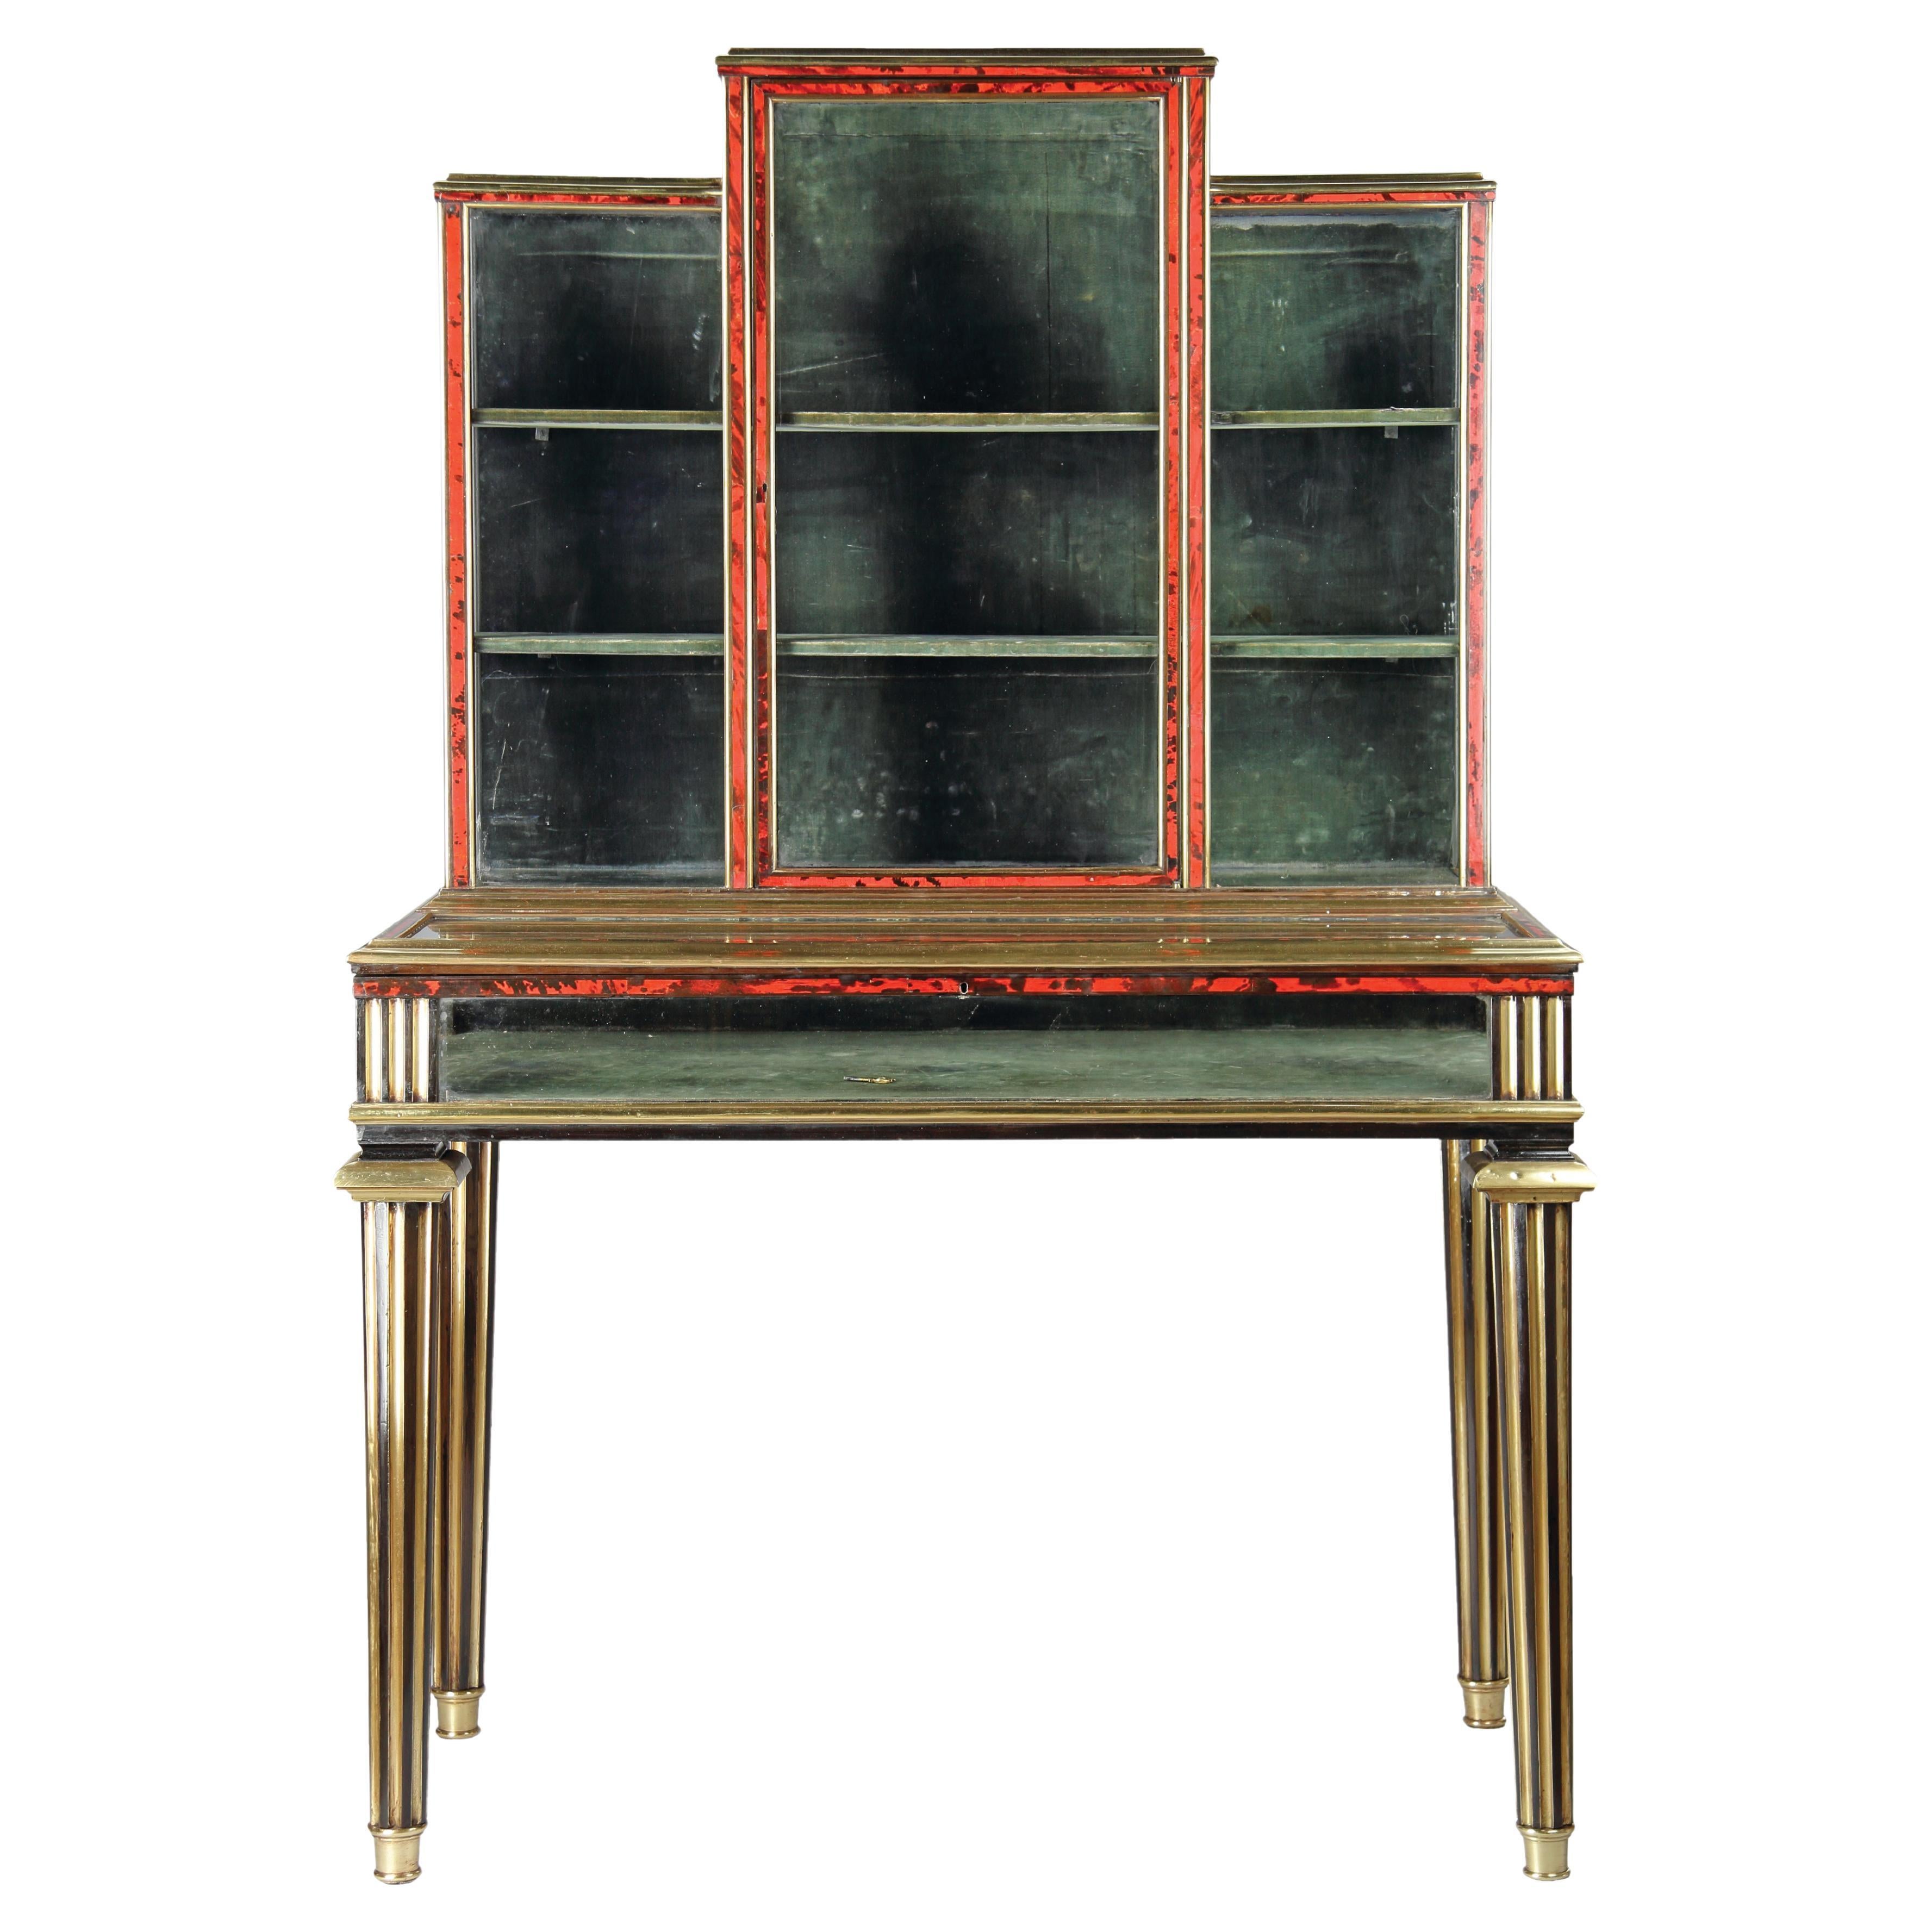 A Superb Pair of French Brass Mounted Tortoiseshell Veneered Collectors Cabinets